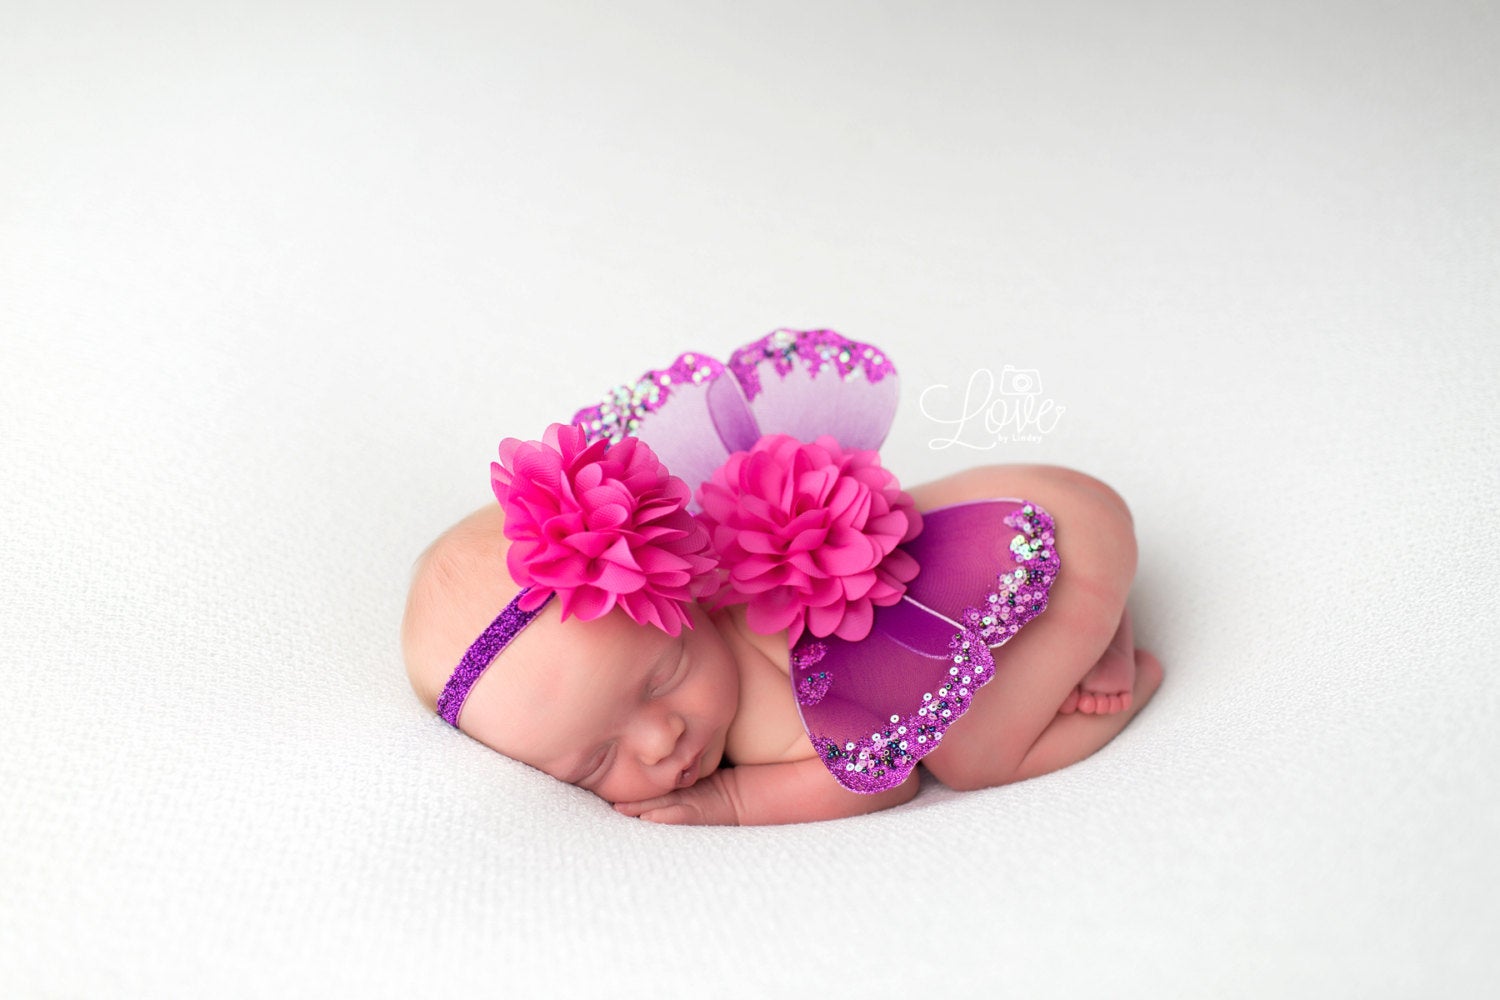 Purple and Hot Pink Butterfly Wing Set